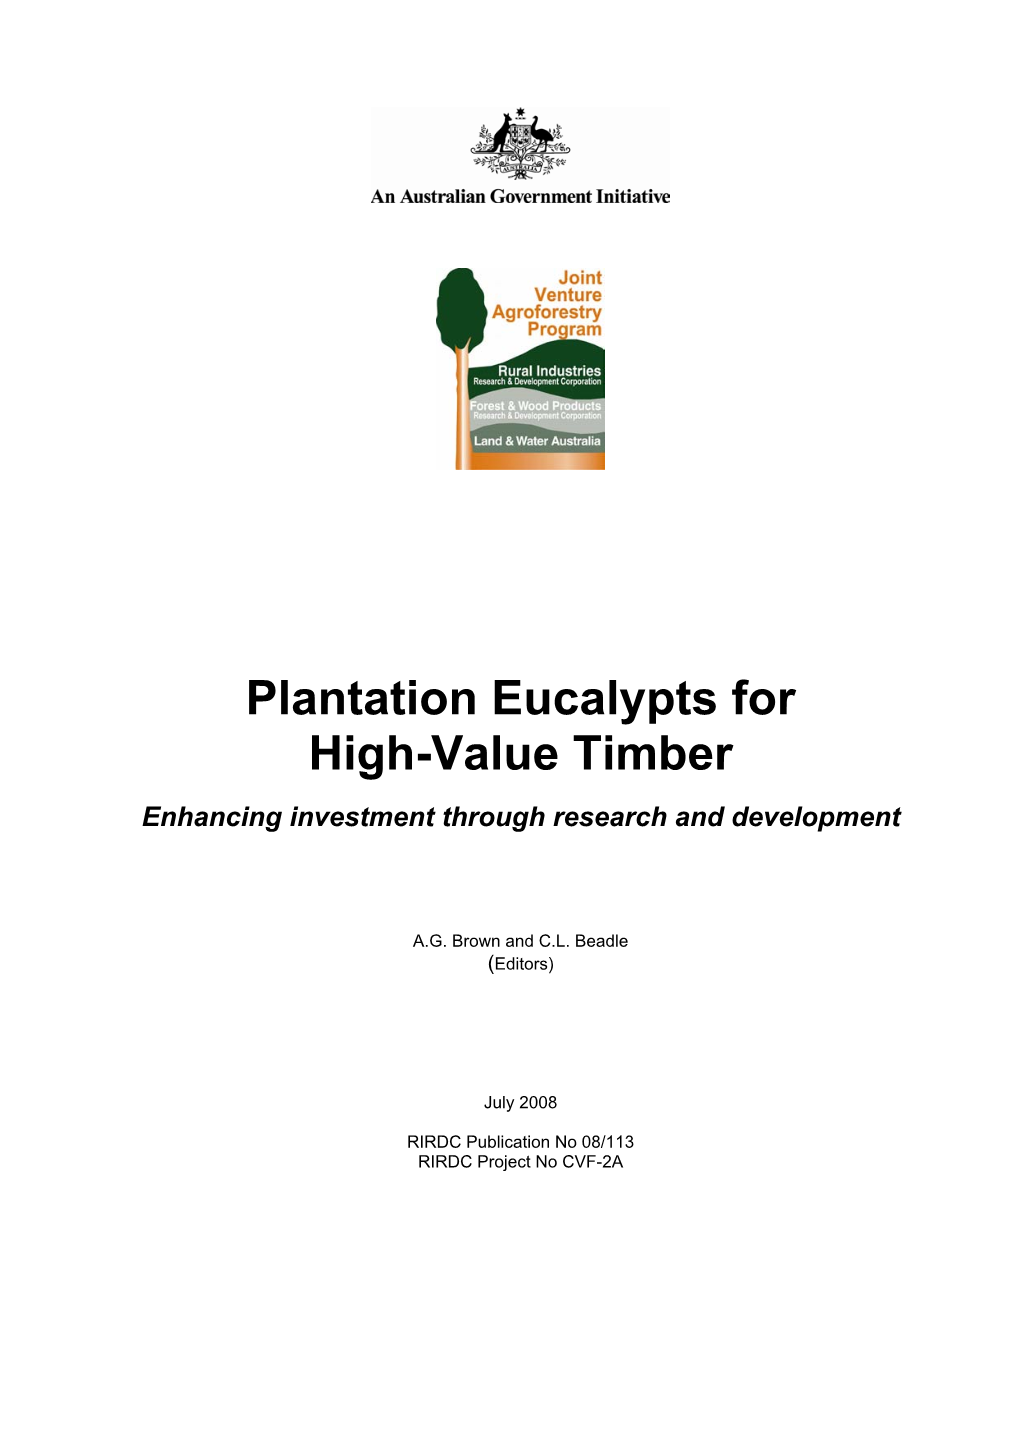 Plantation Eucalypts for High-Value Timber Enhancing Investment Through Research and Development